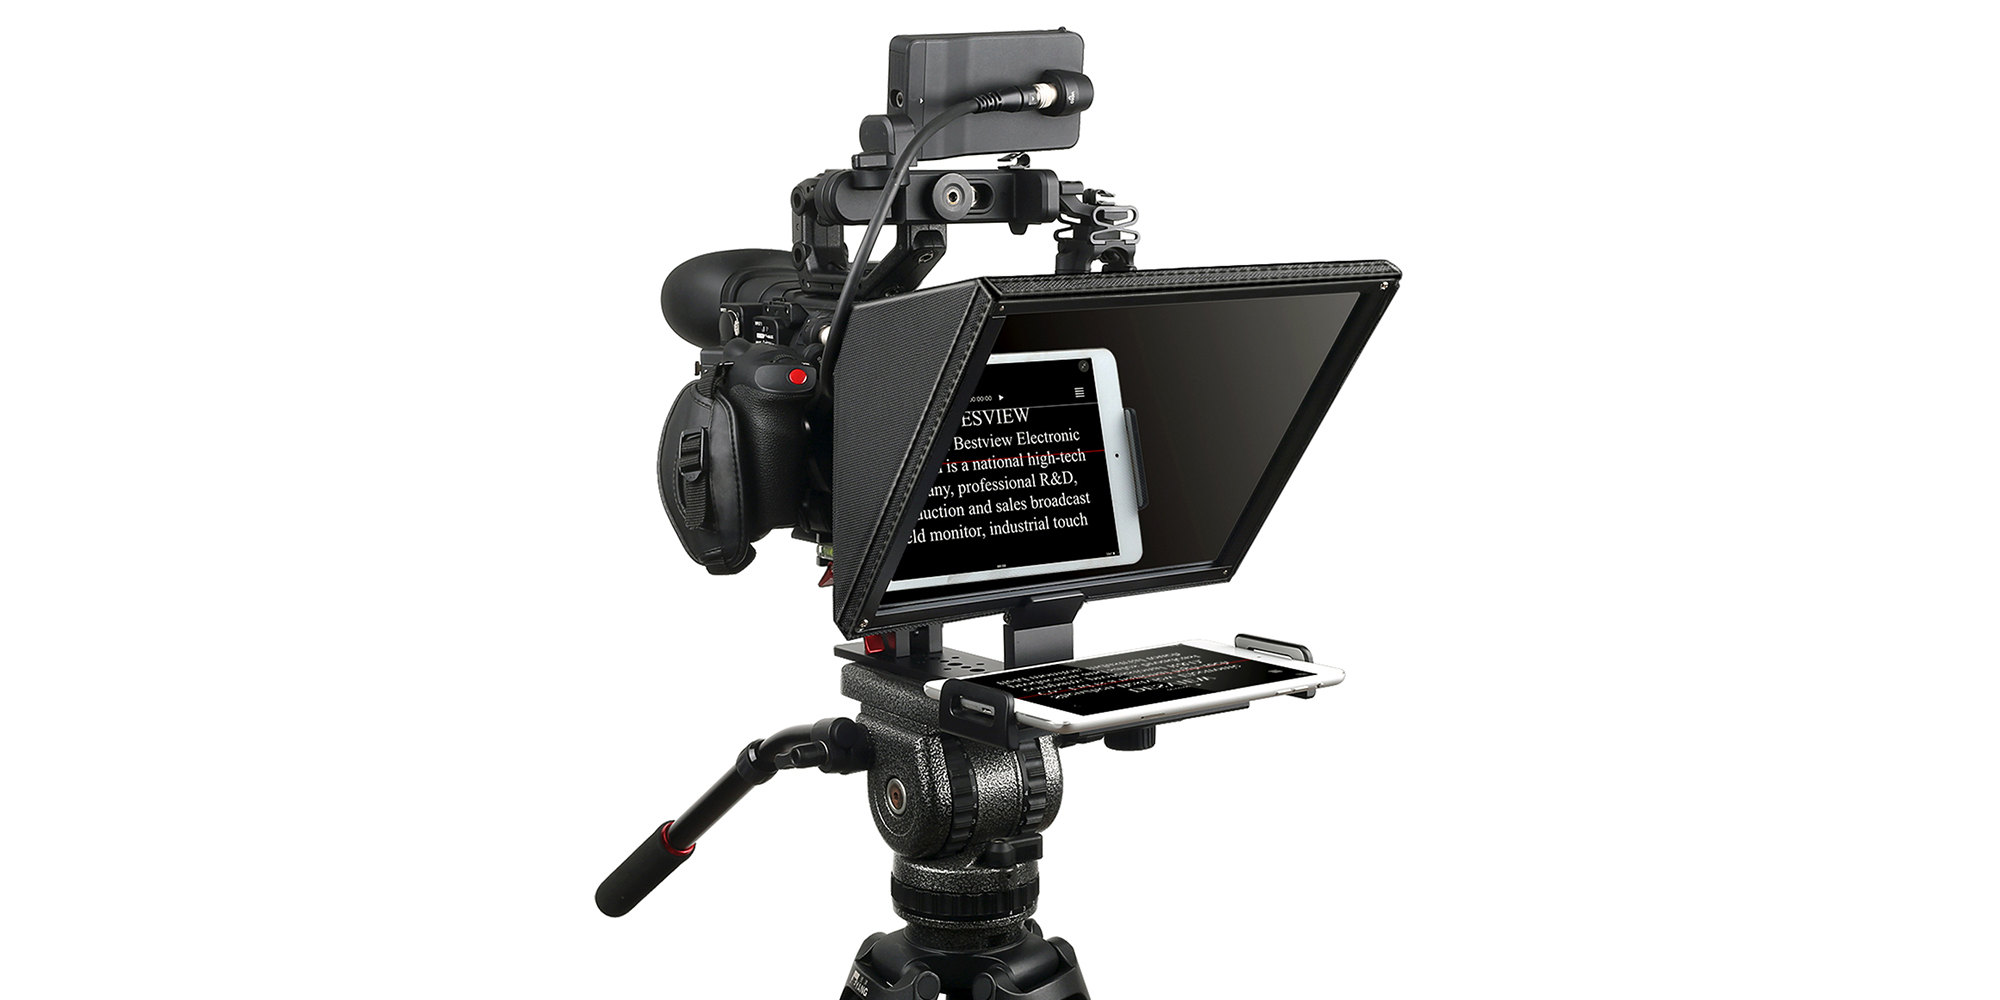 Desview T12 Teleprompter - Successful recordings on the first try!